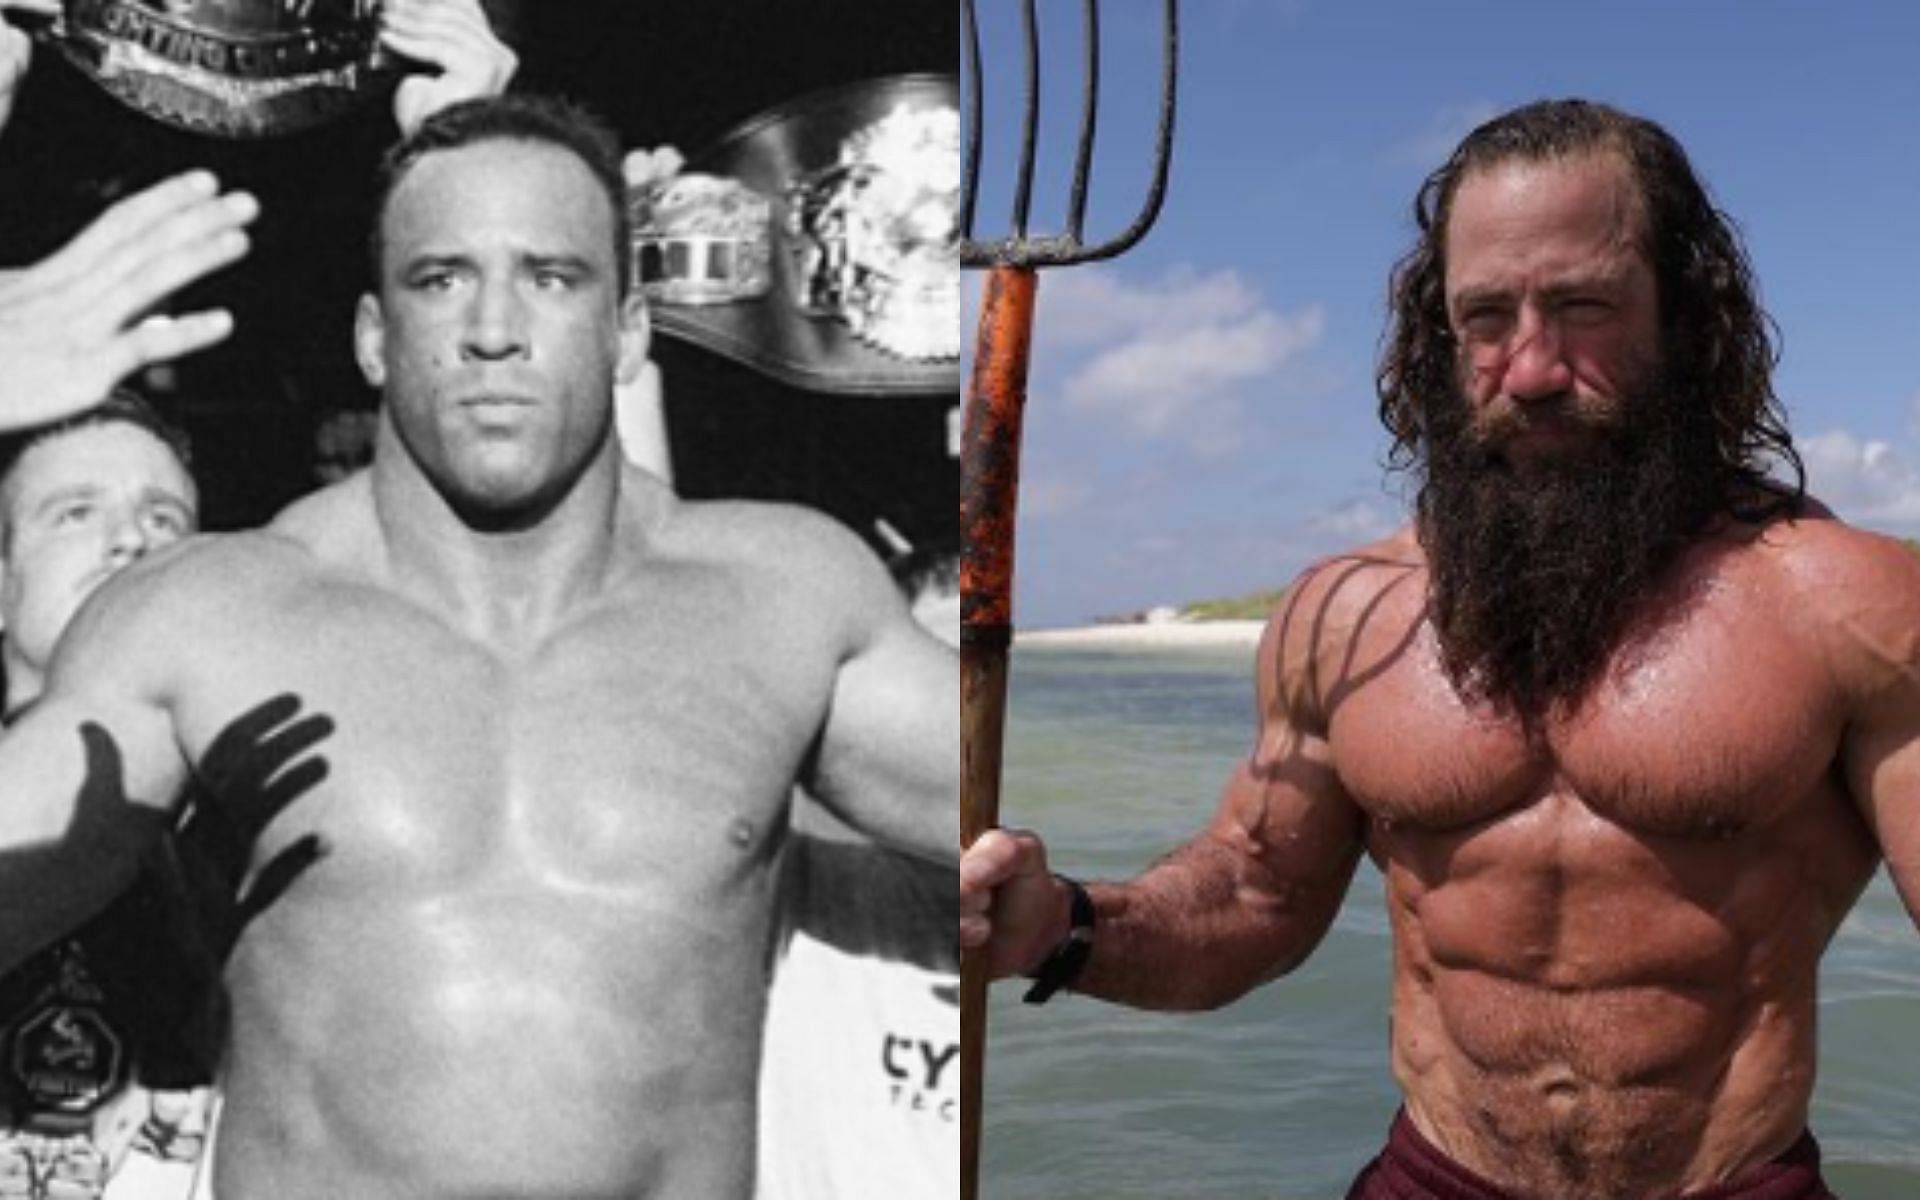 Mark Coleman on the left and Liver King on the right [Image source: @markcolemanmma on Twitter and @liverking on Instagram]